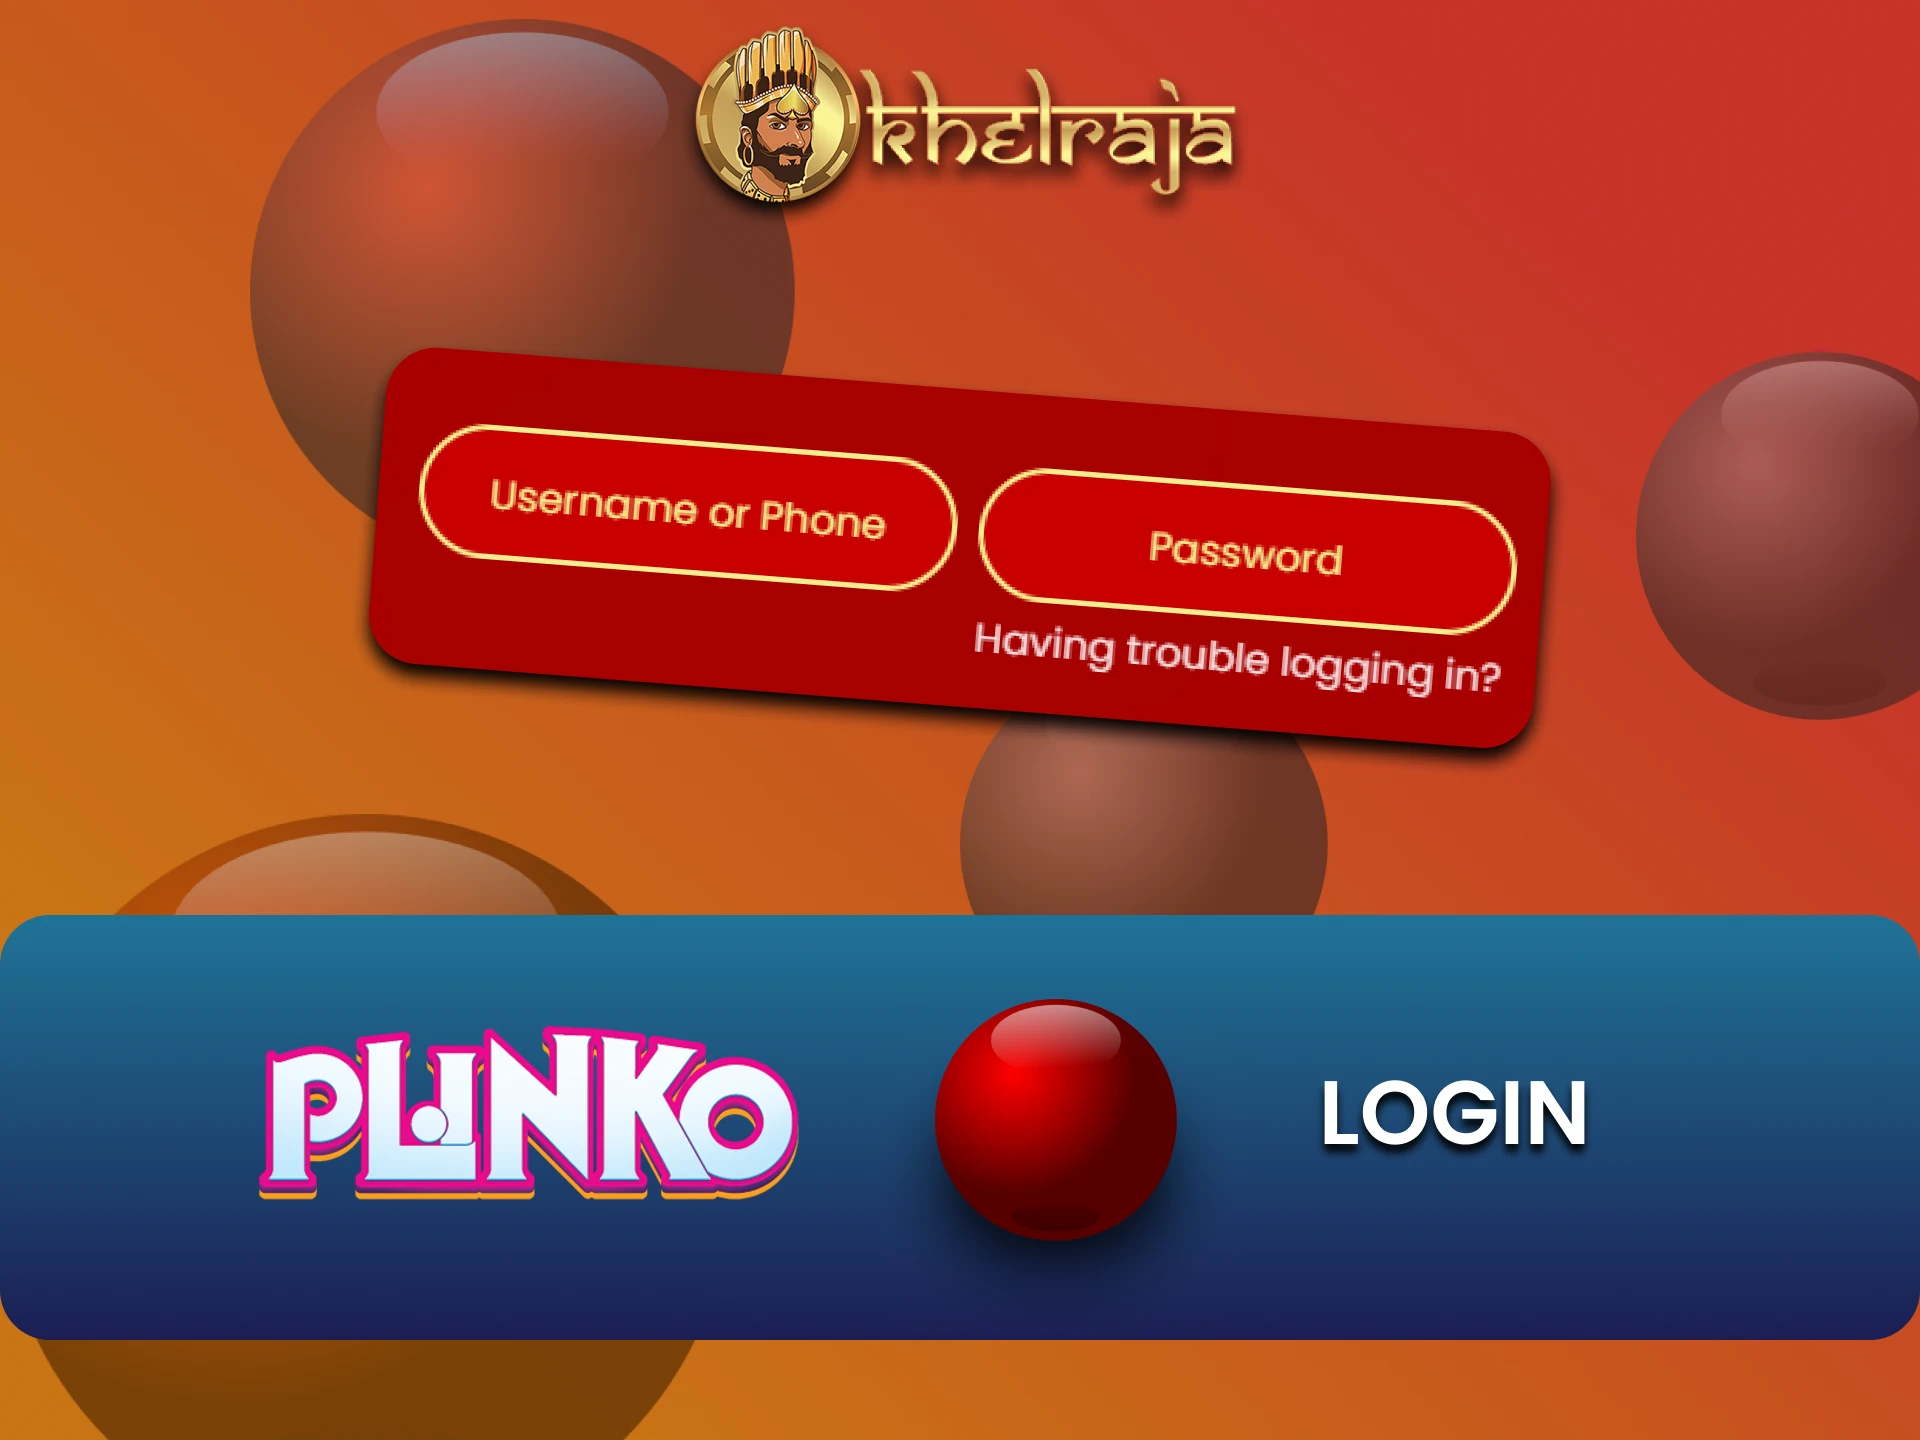 By logging into your Khelraja account you can play Plinko.